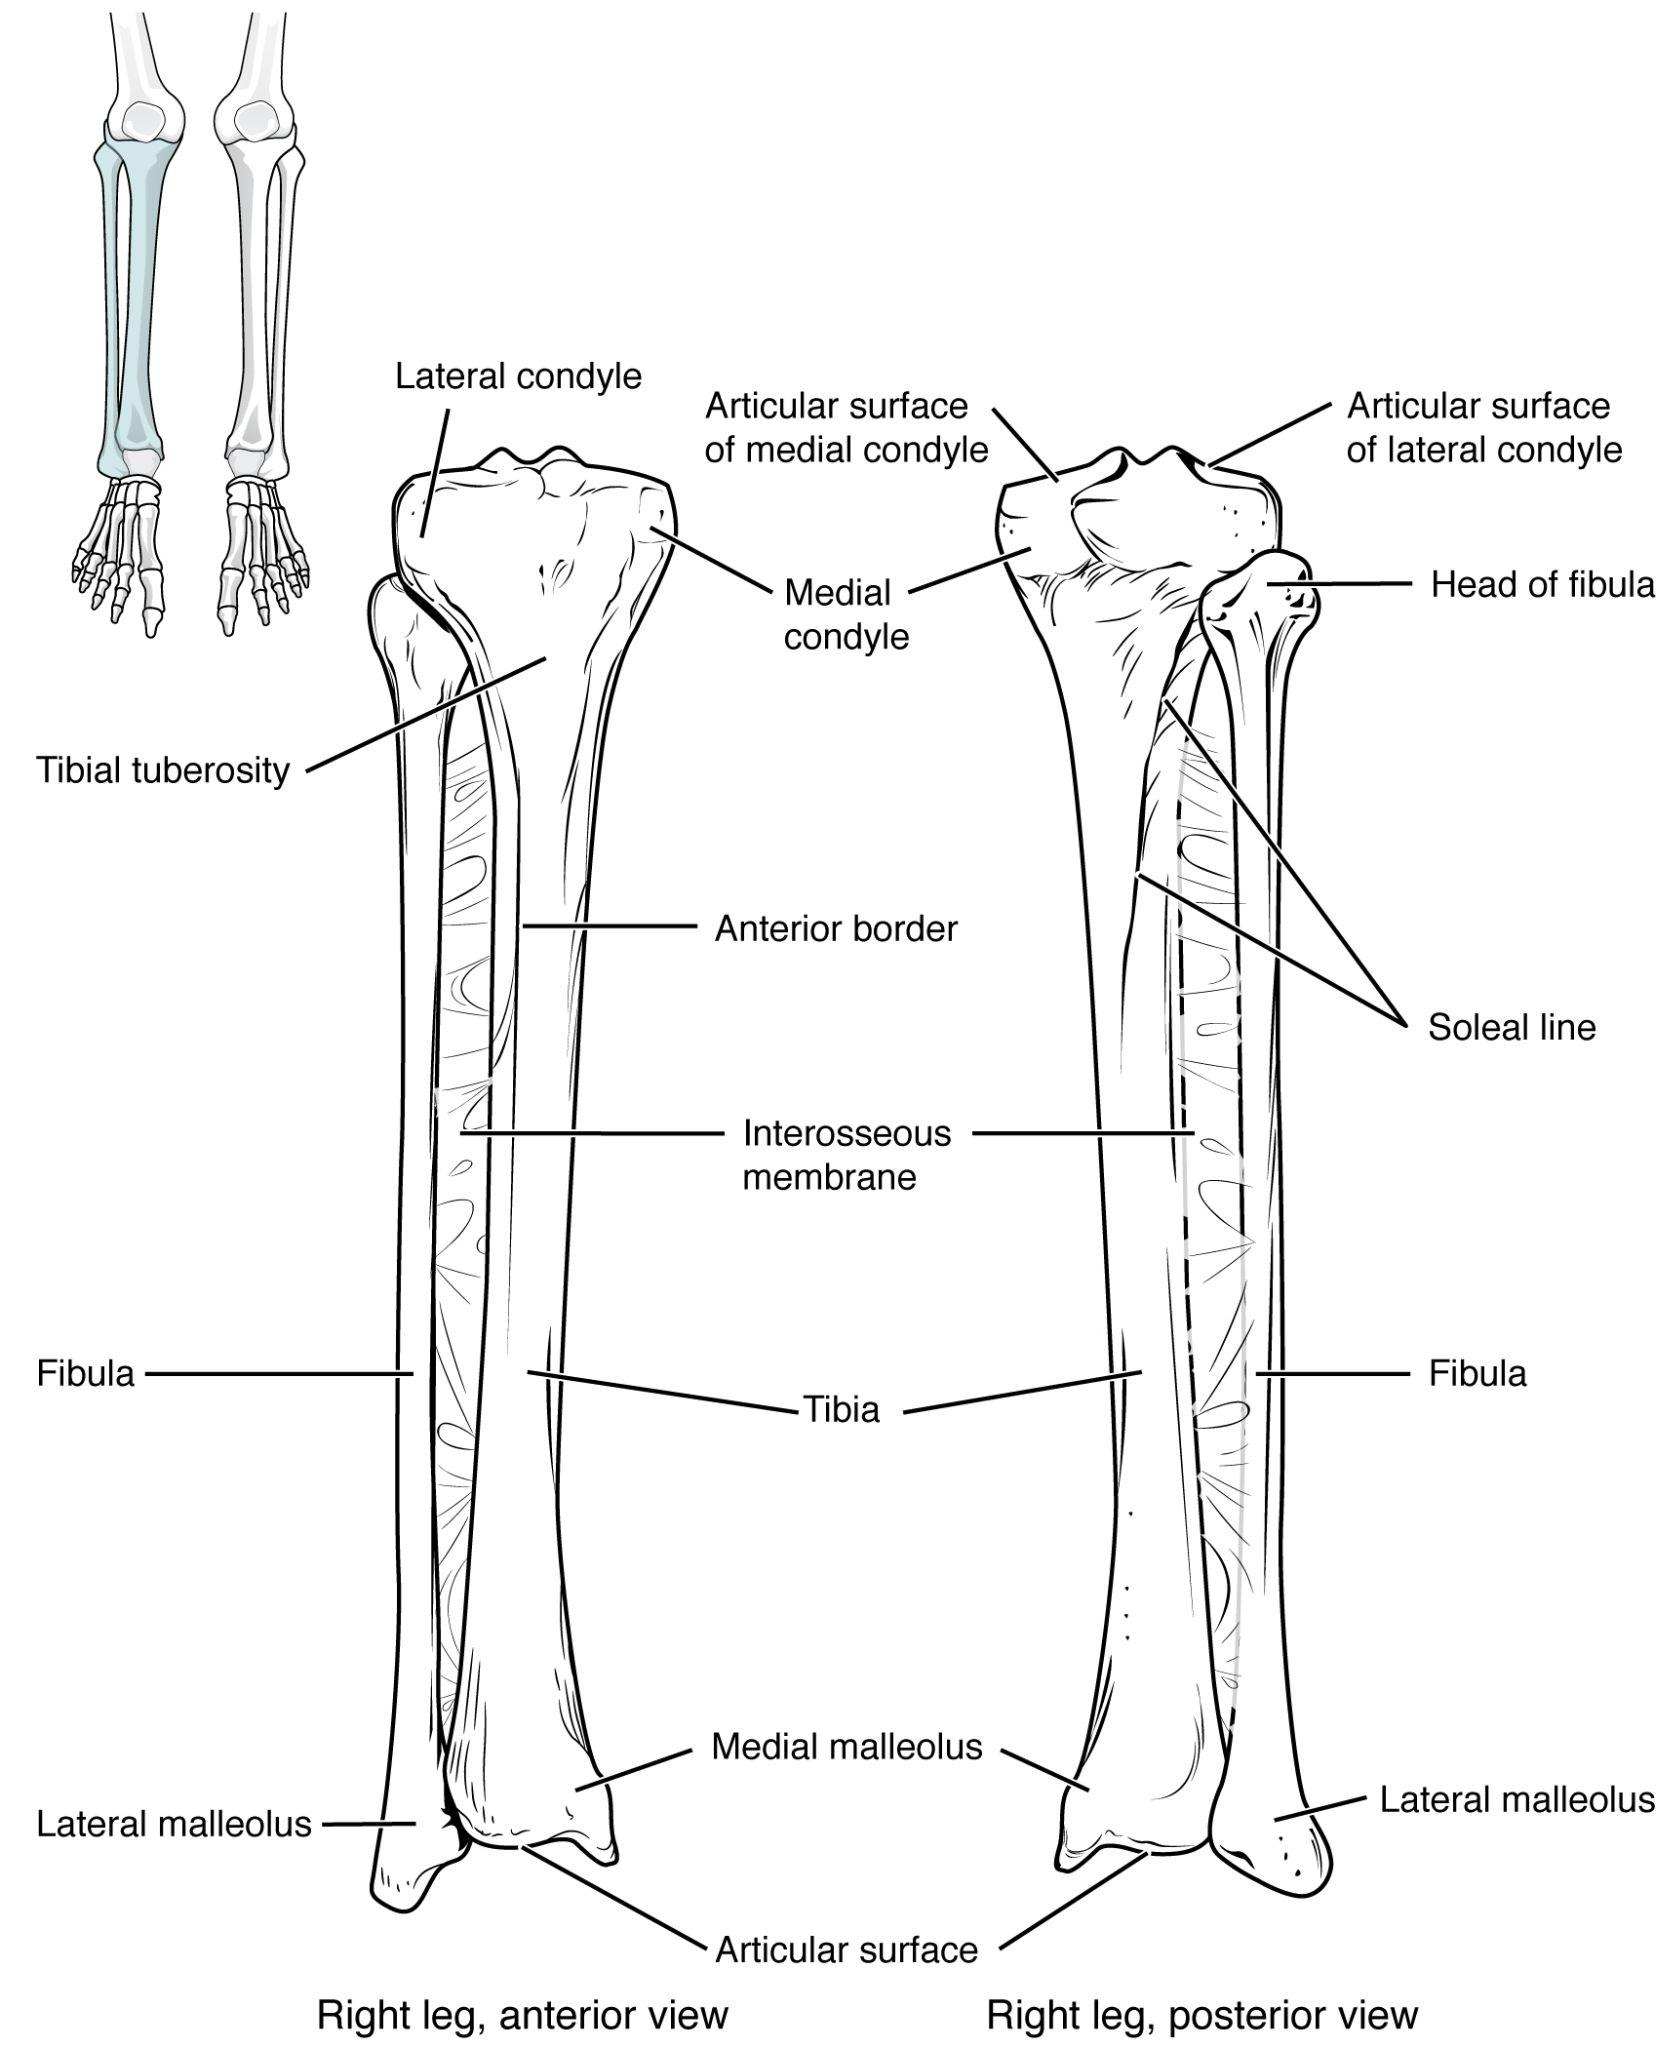 Anterior and posterior views of tibia and fibula in articulation.